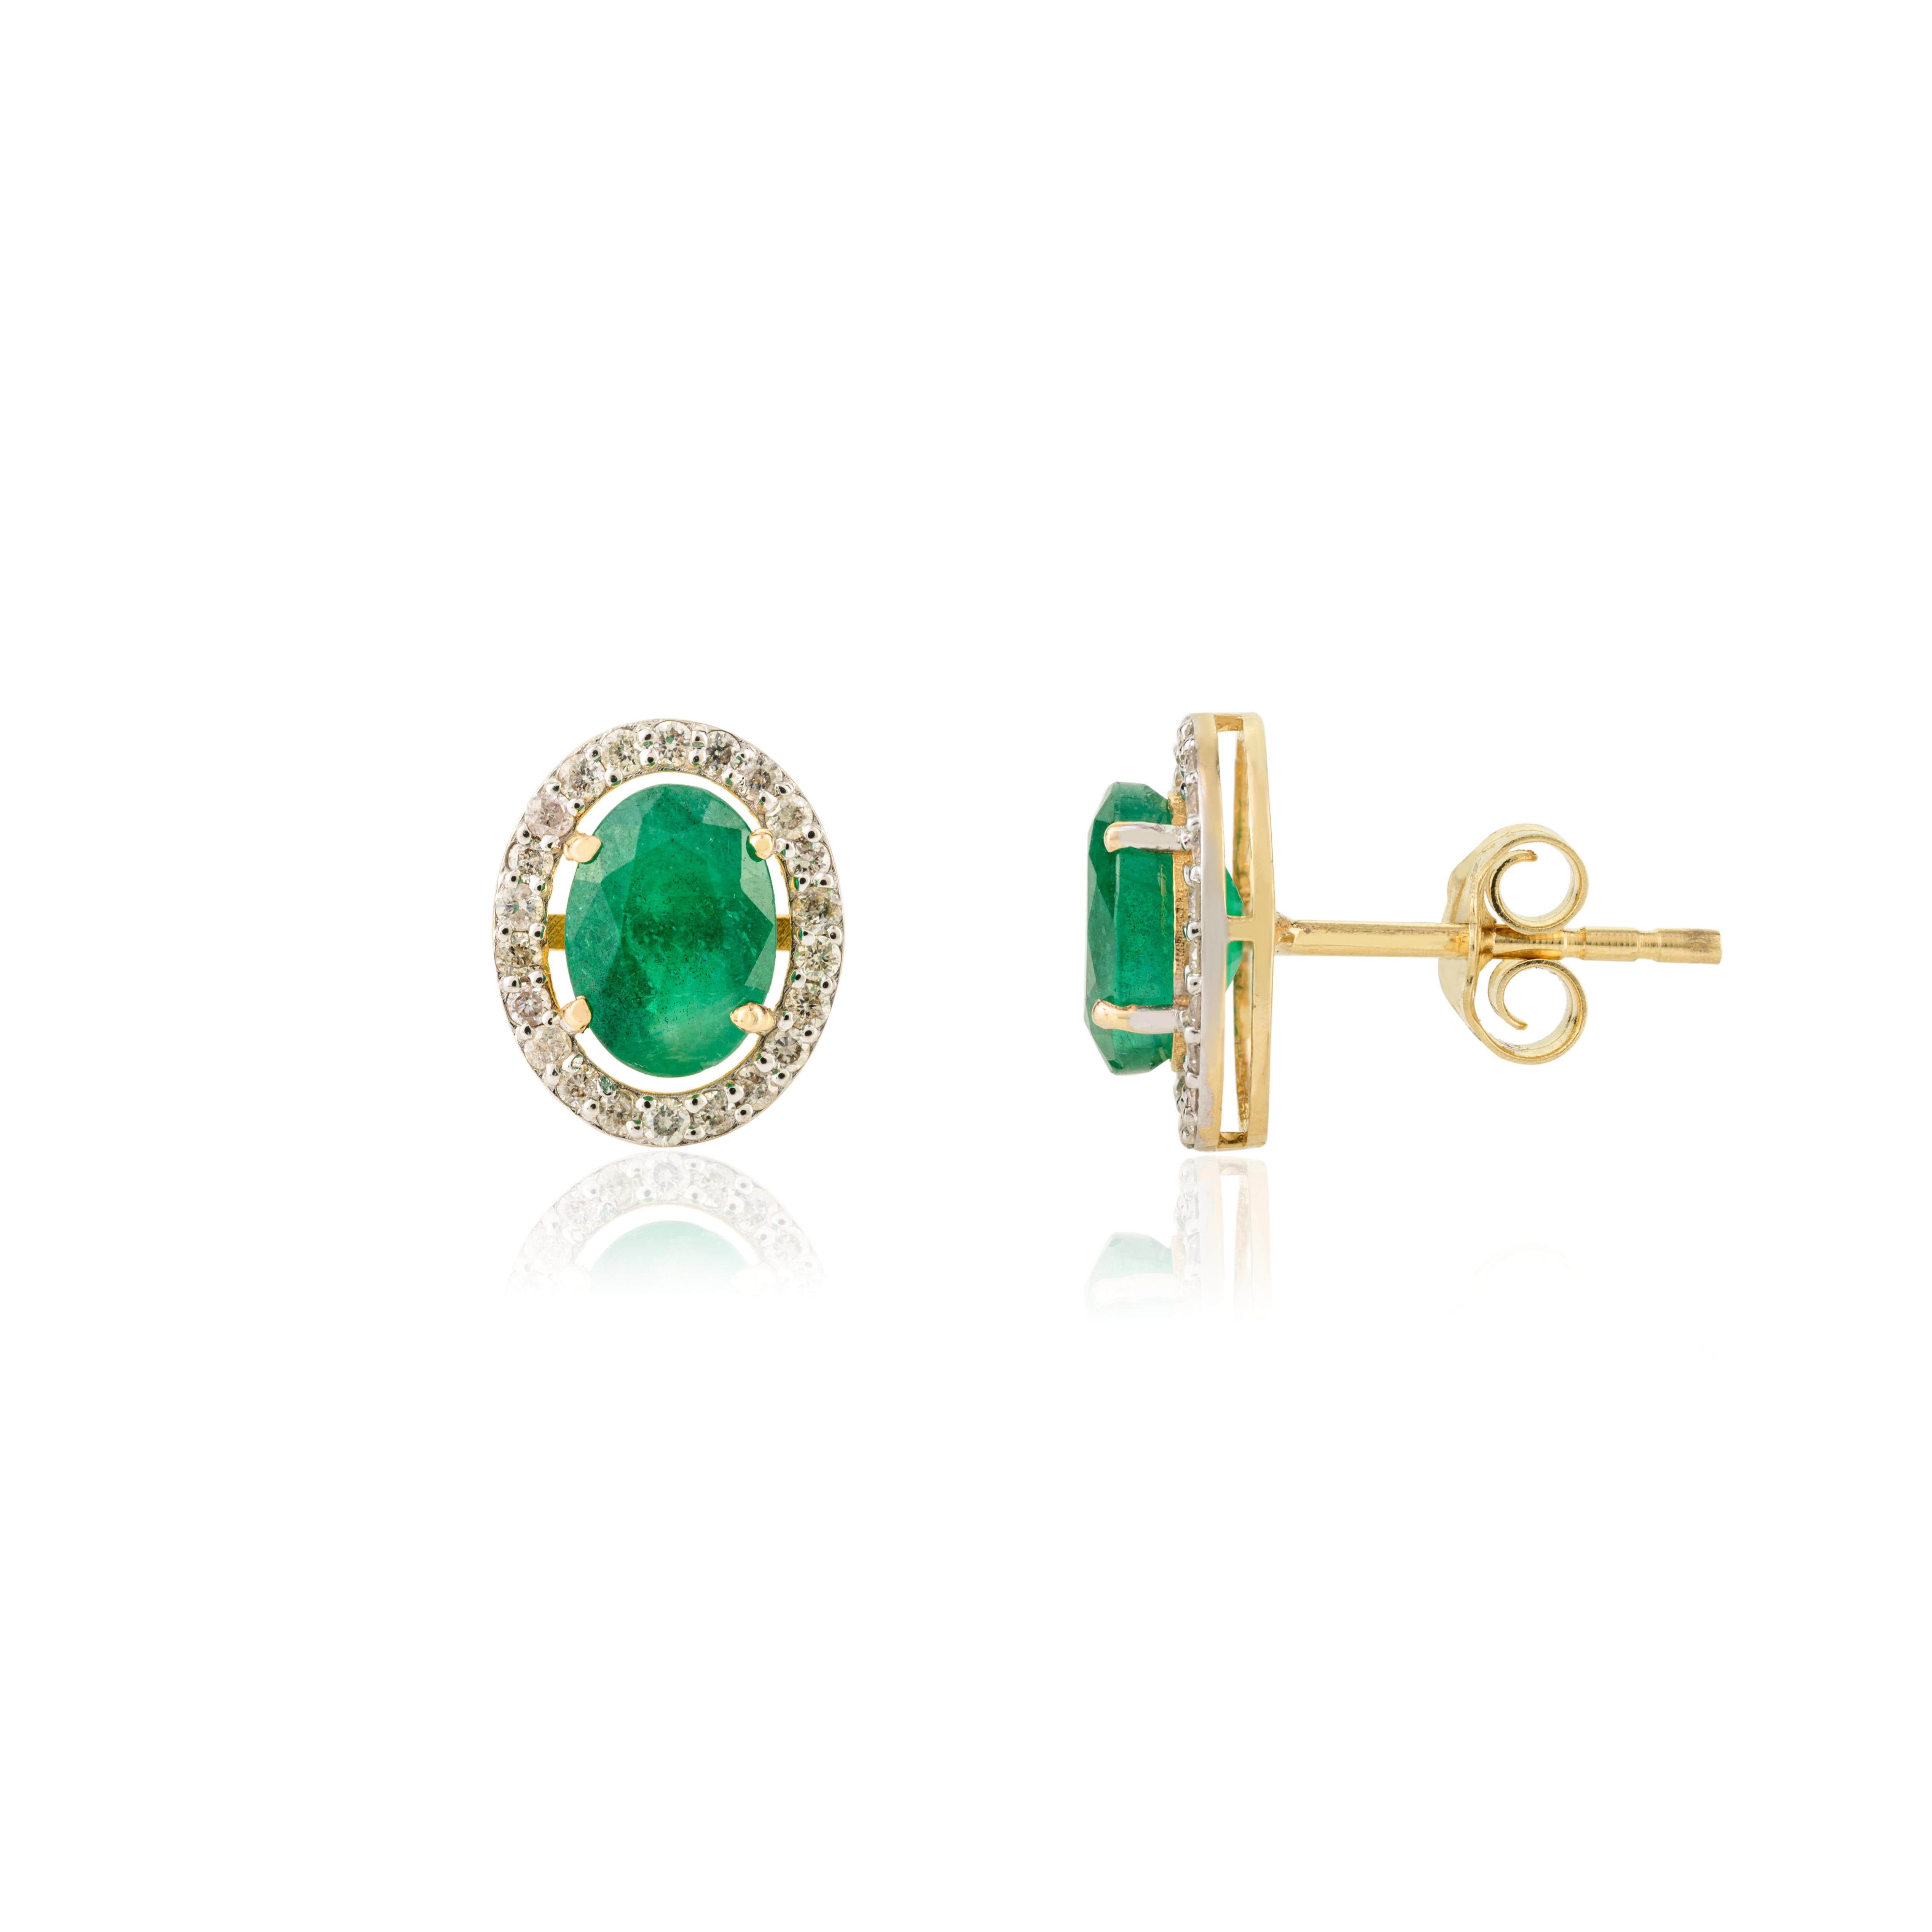 14 Karat Yellow Gold Oval Emerald and Diamond Halo Stud Earrings Gift for Mom In New Condition For Sale In Houston, TX